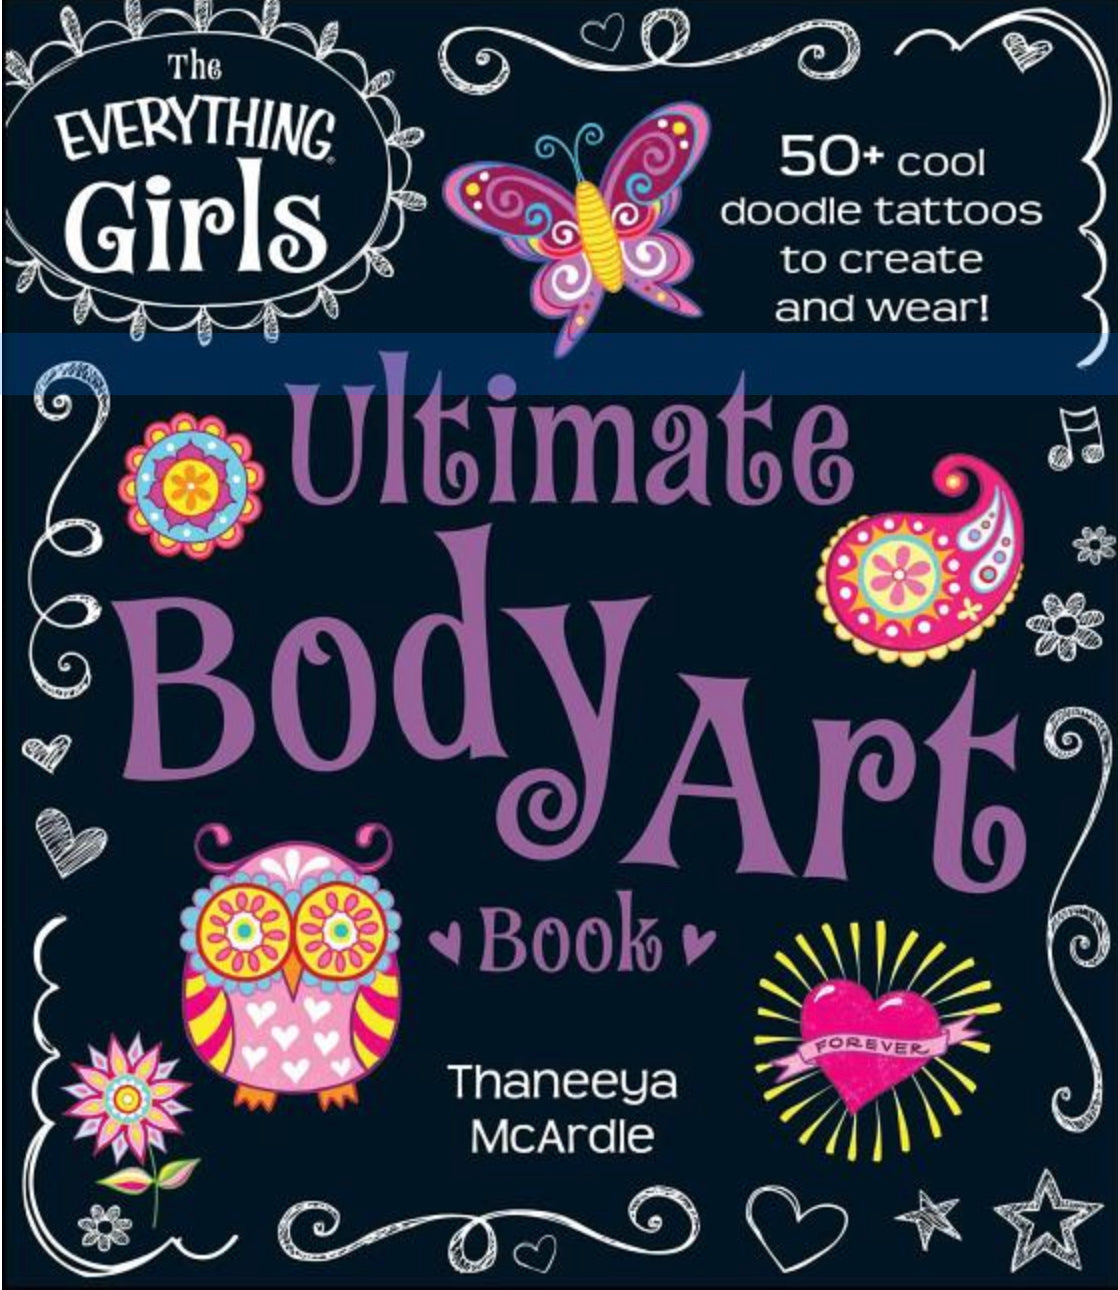 The Everything Girls- Ultimate Body Art Book